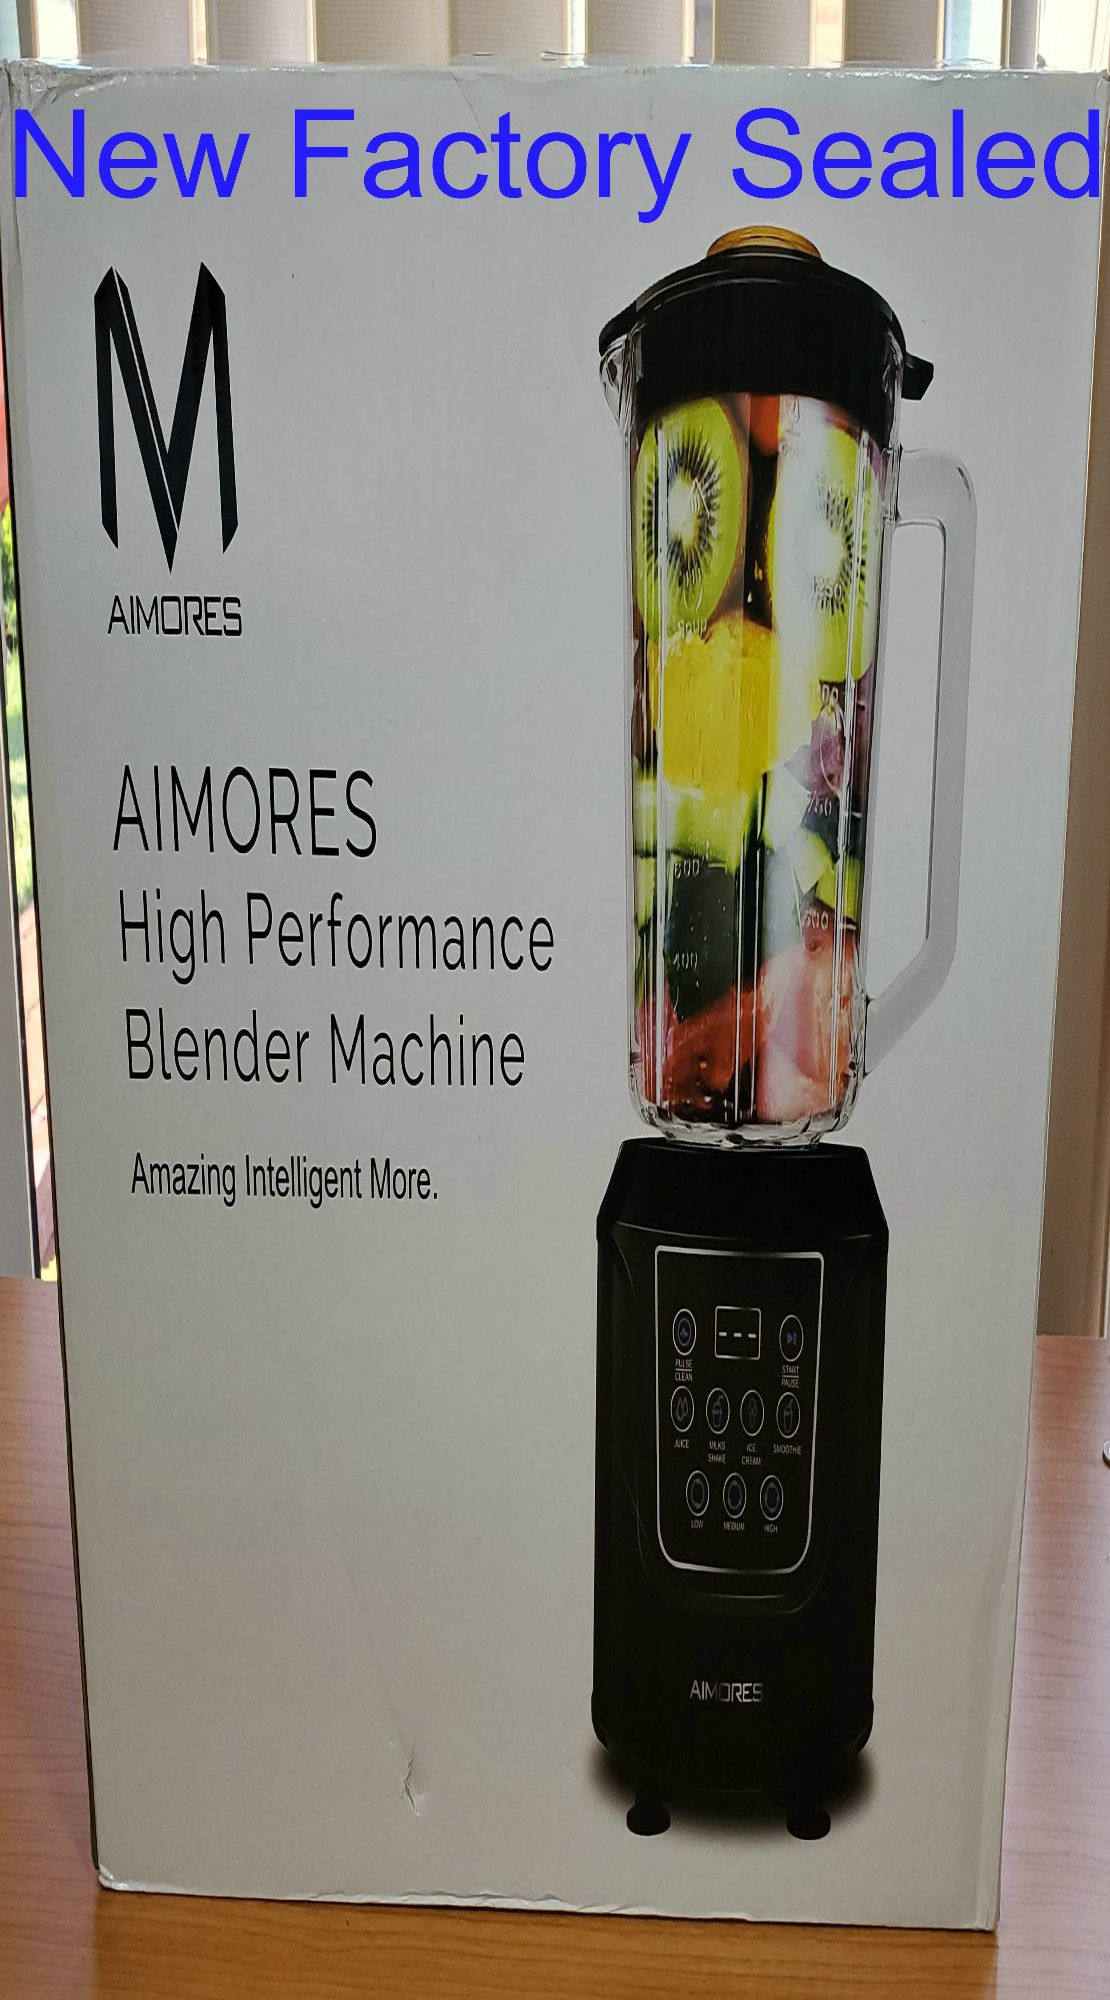 NEW Aimores Pre Programmed LED Display Blender High Perfomance Machine for Smoothies AS-UP1250 Factory Sealed Box